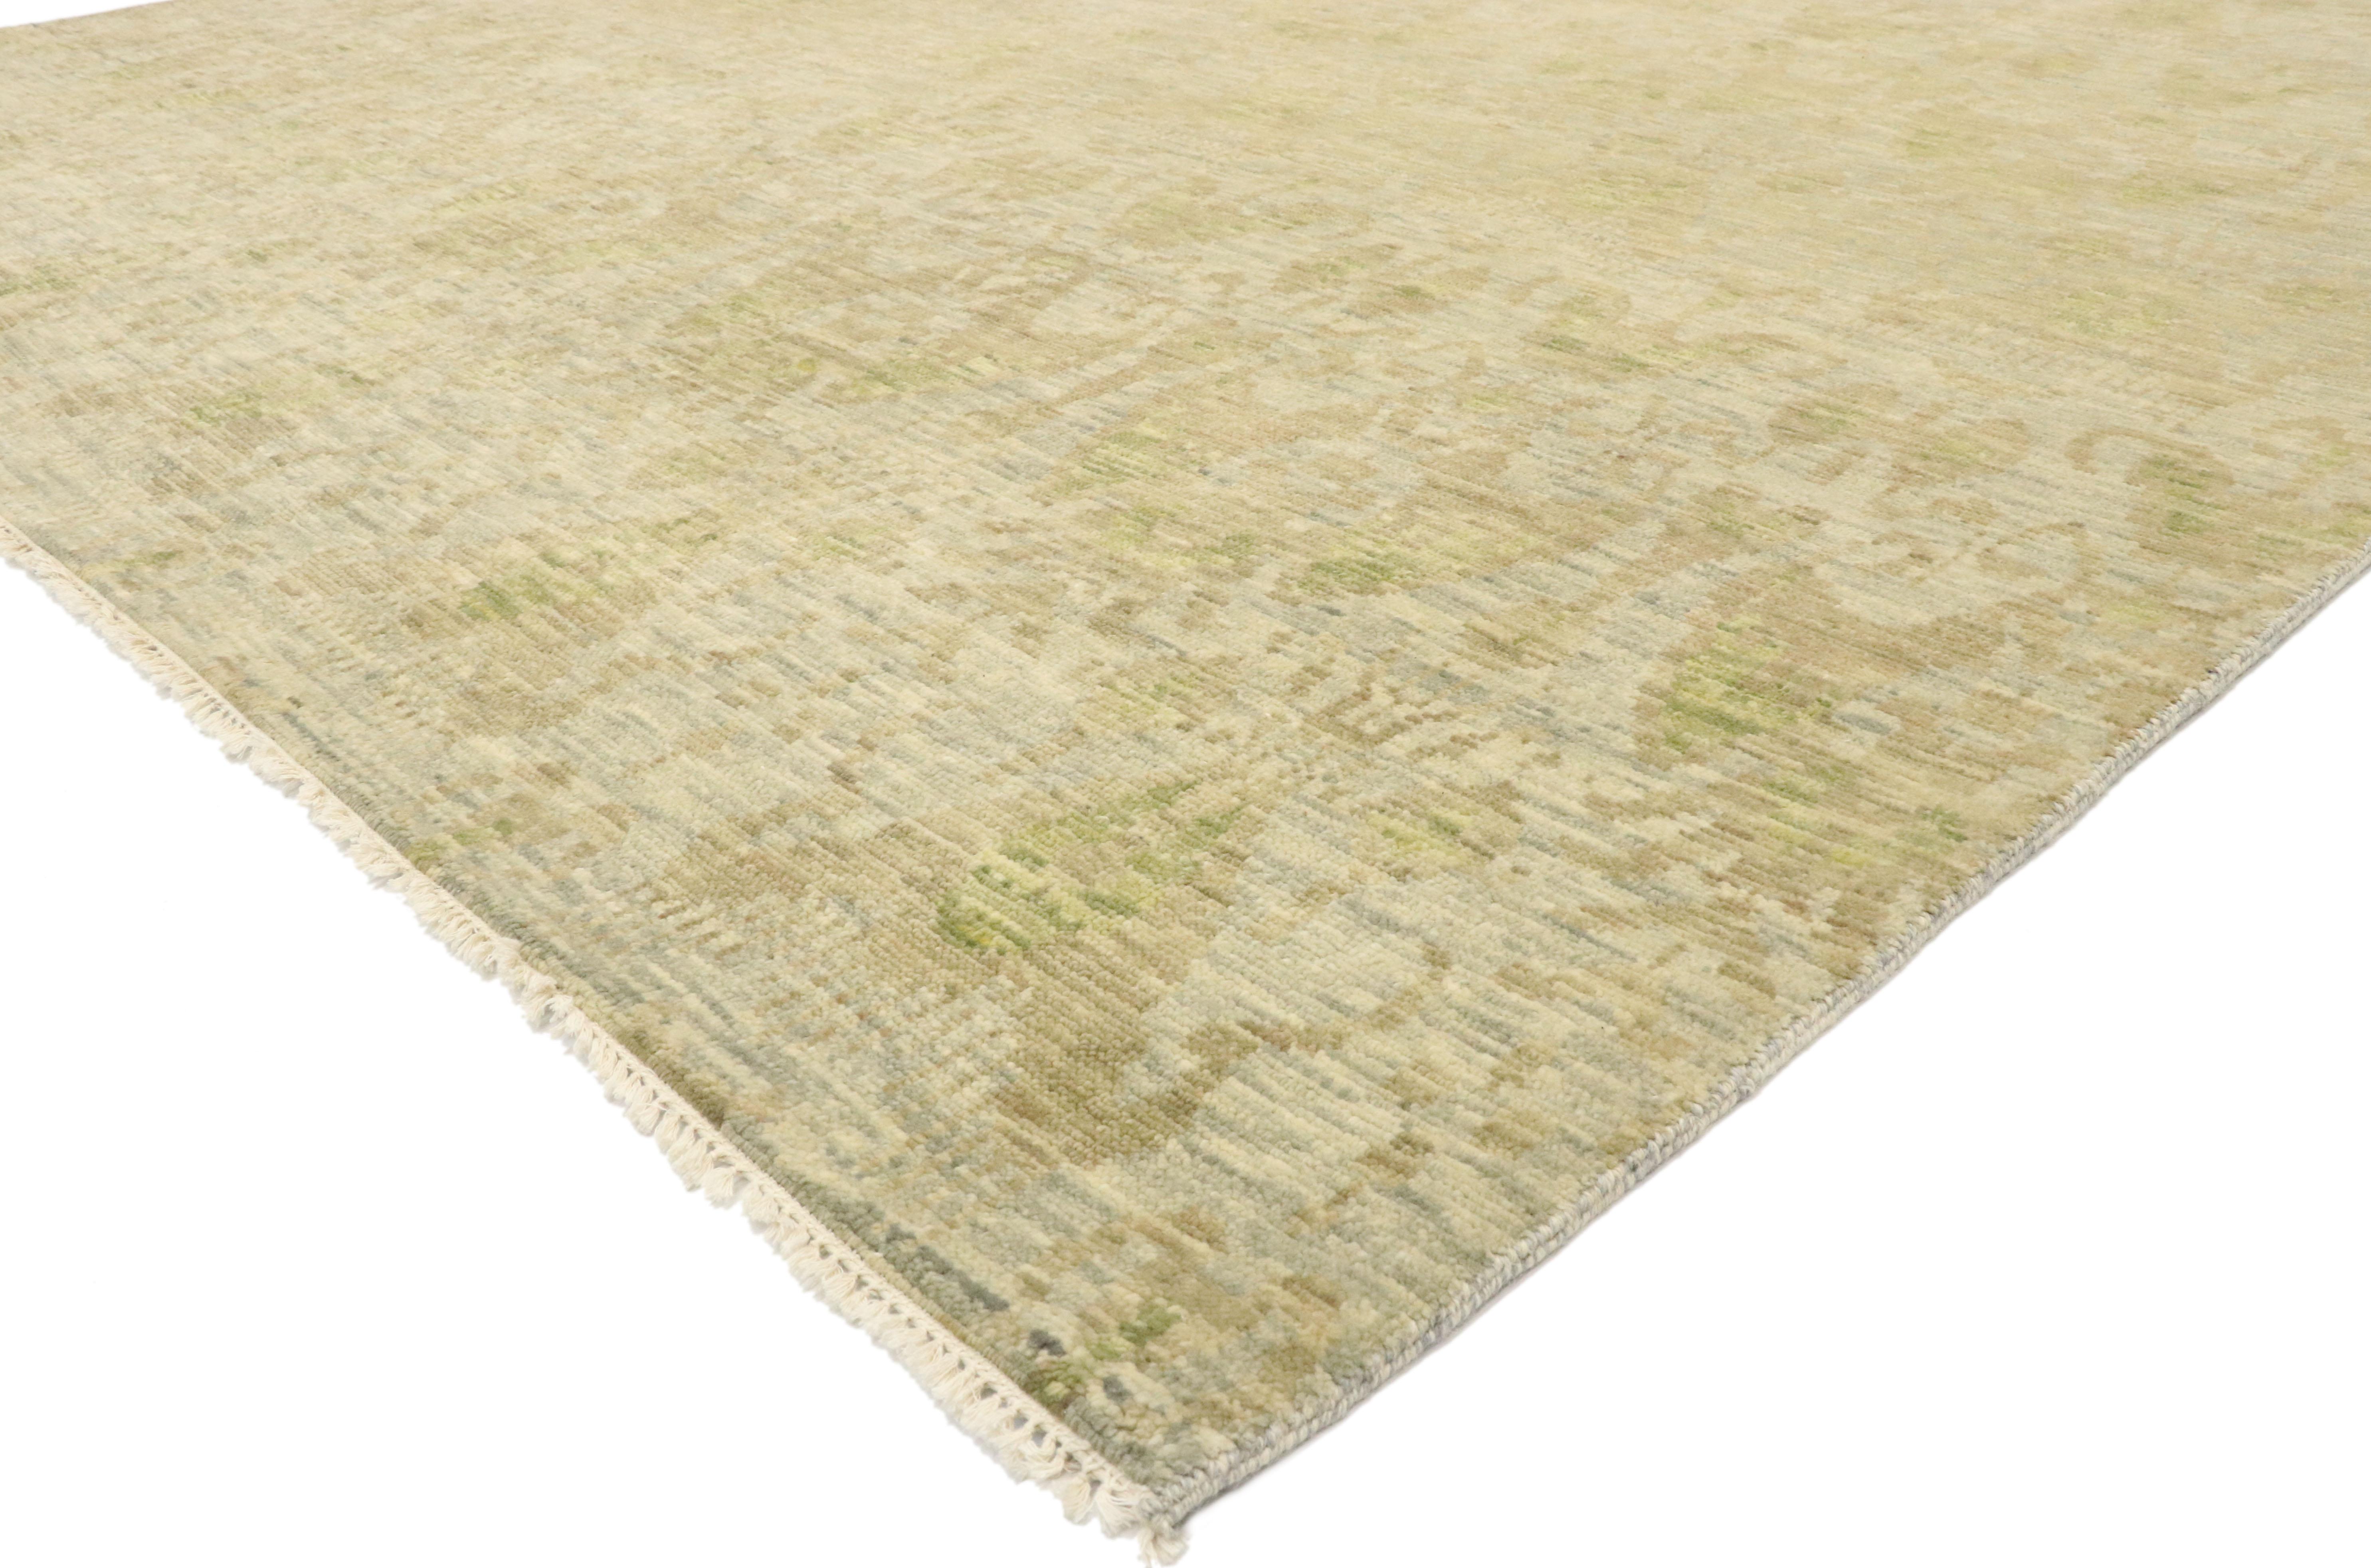 30076, new transitional Ikat area rug with modern design, neutral color area rug 10'02 x 13'11. With its ancient roots and modern design, this transitional Ikat rug looks fresher than ever. The abrashed field features an all-over geometric Ikat